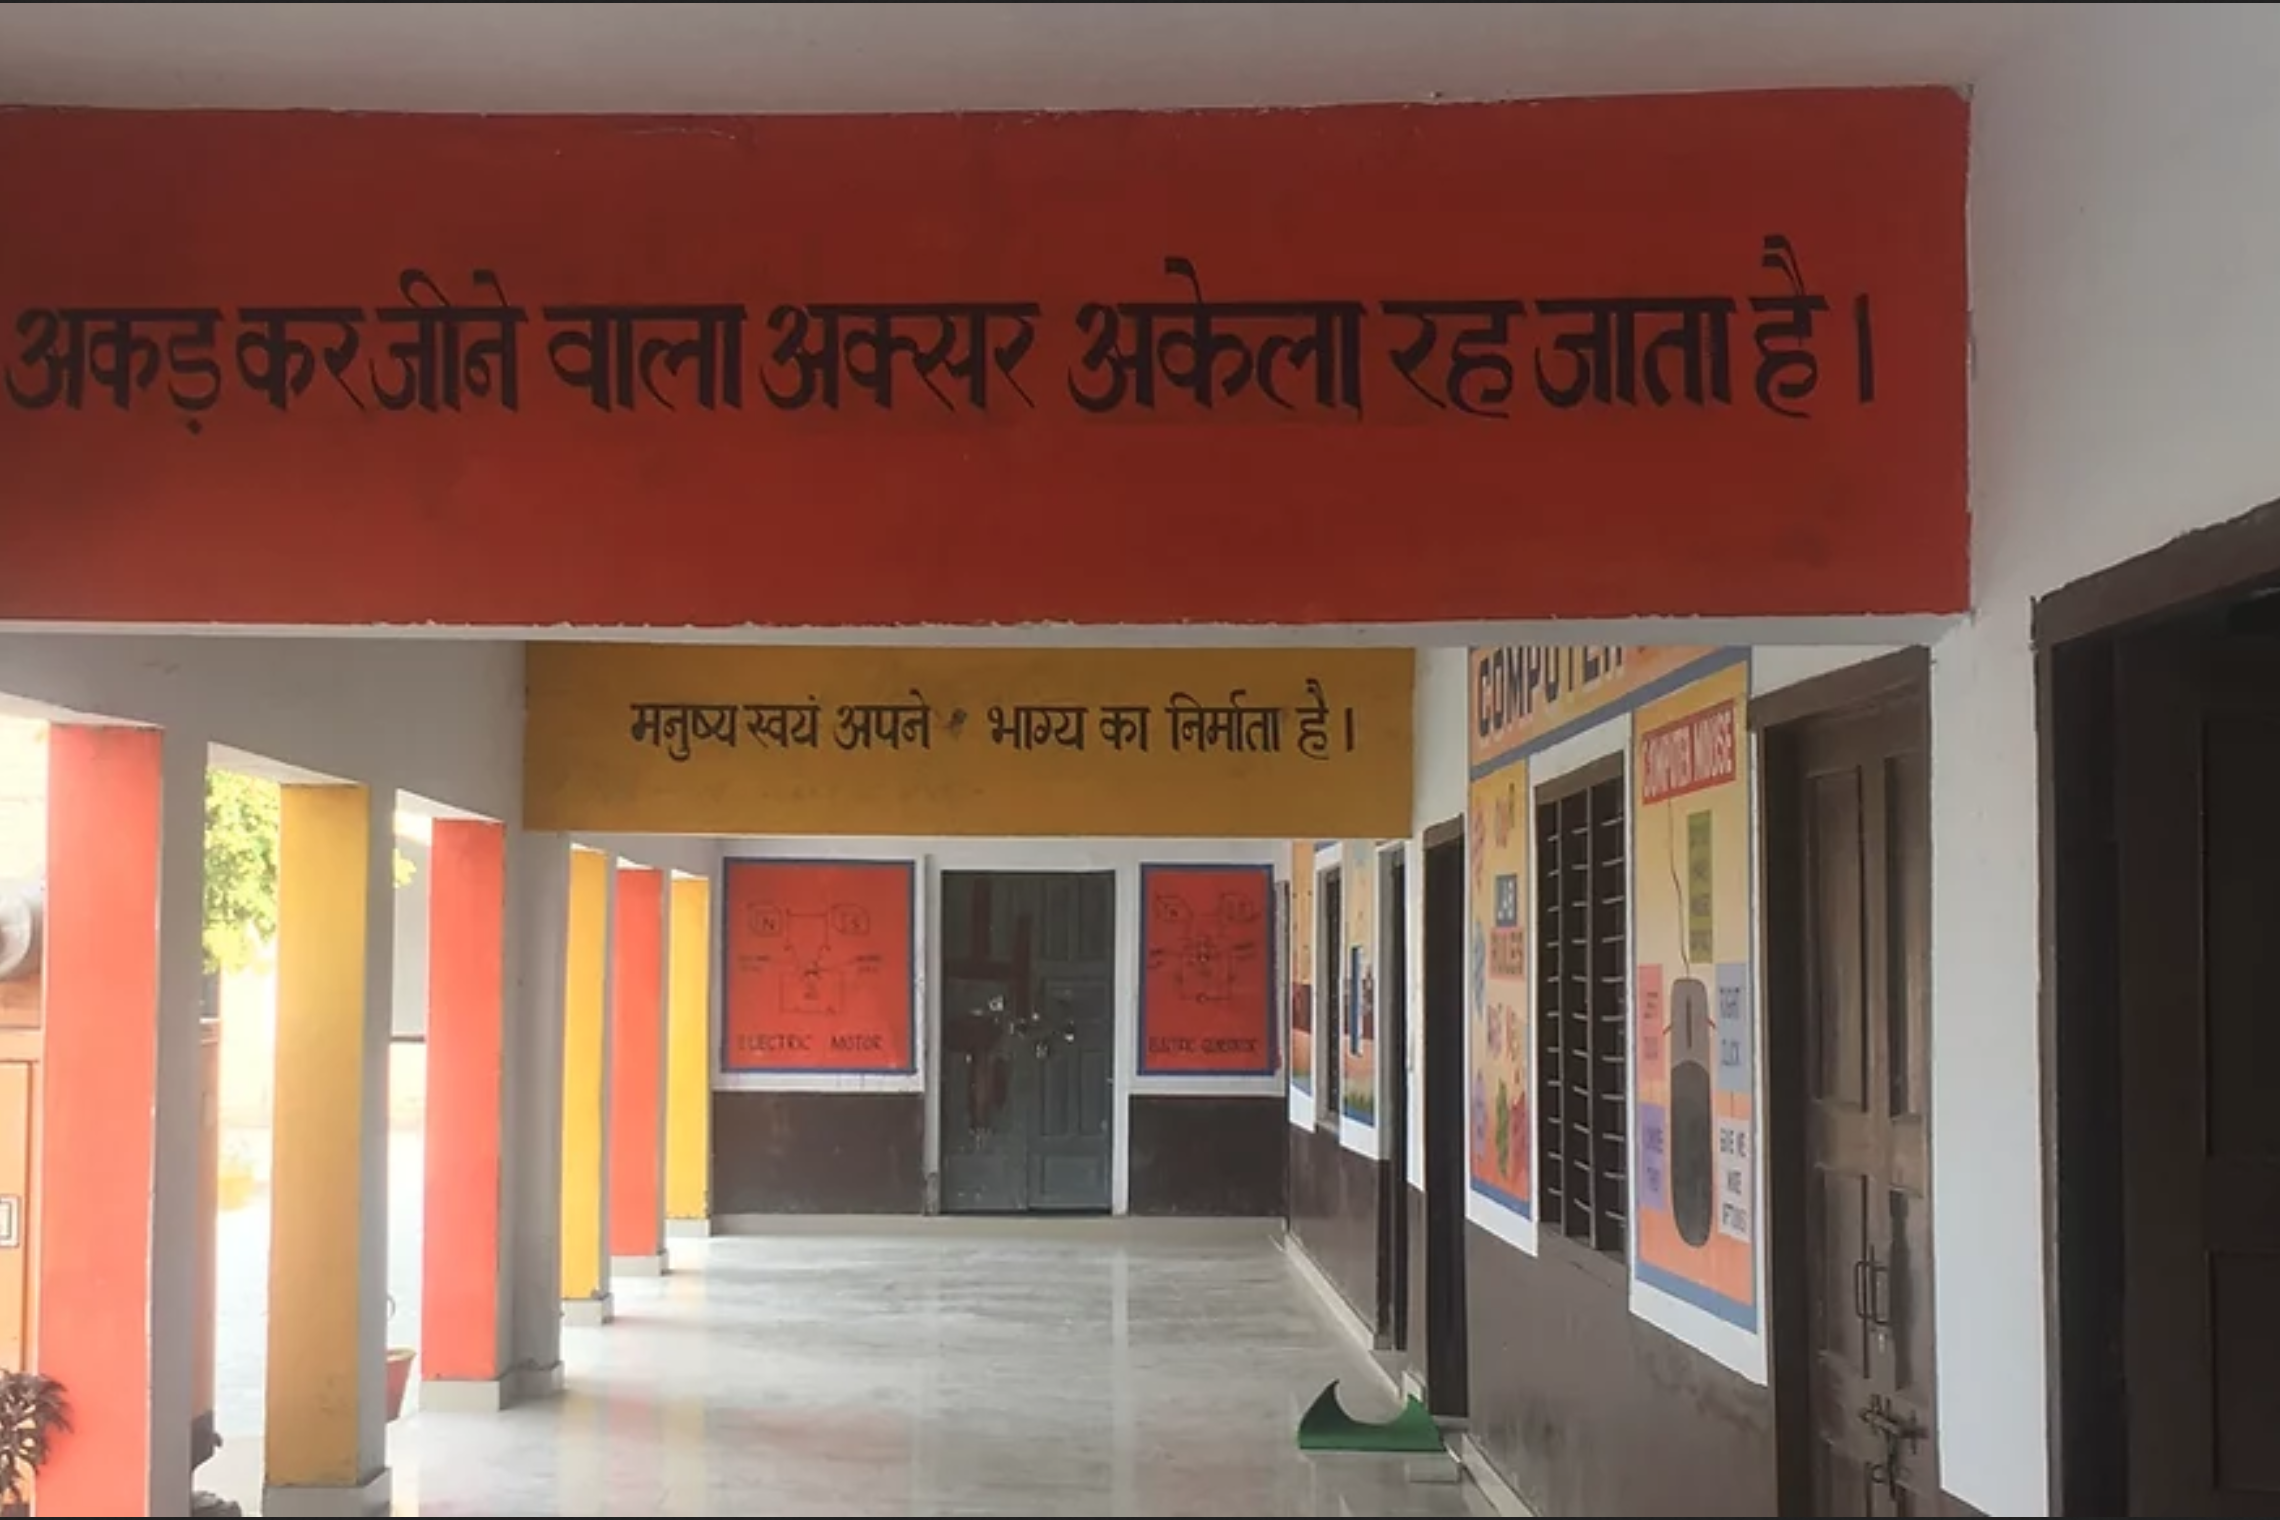 Primary school in the state of Haryana, India